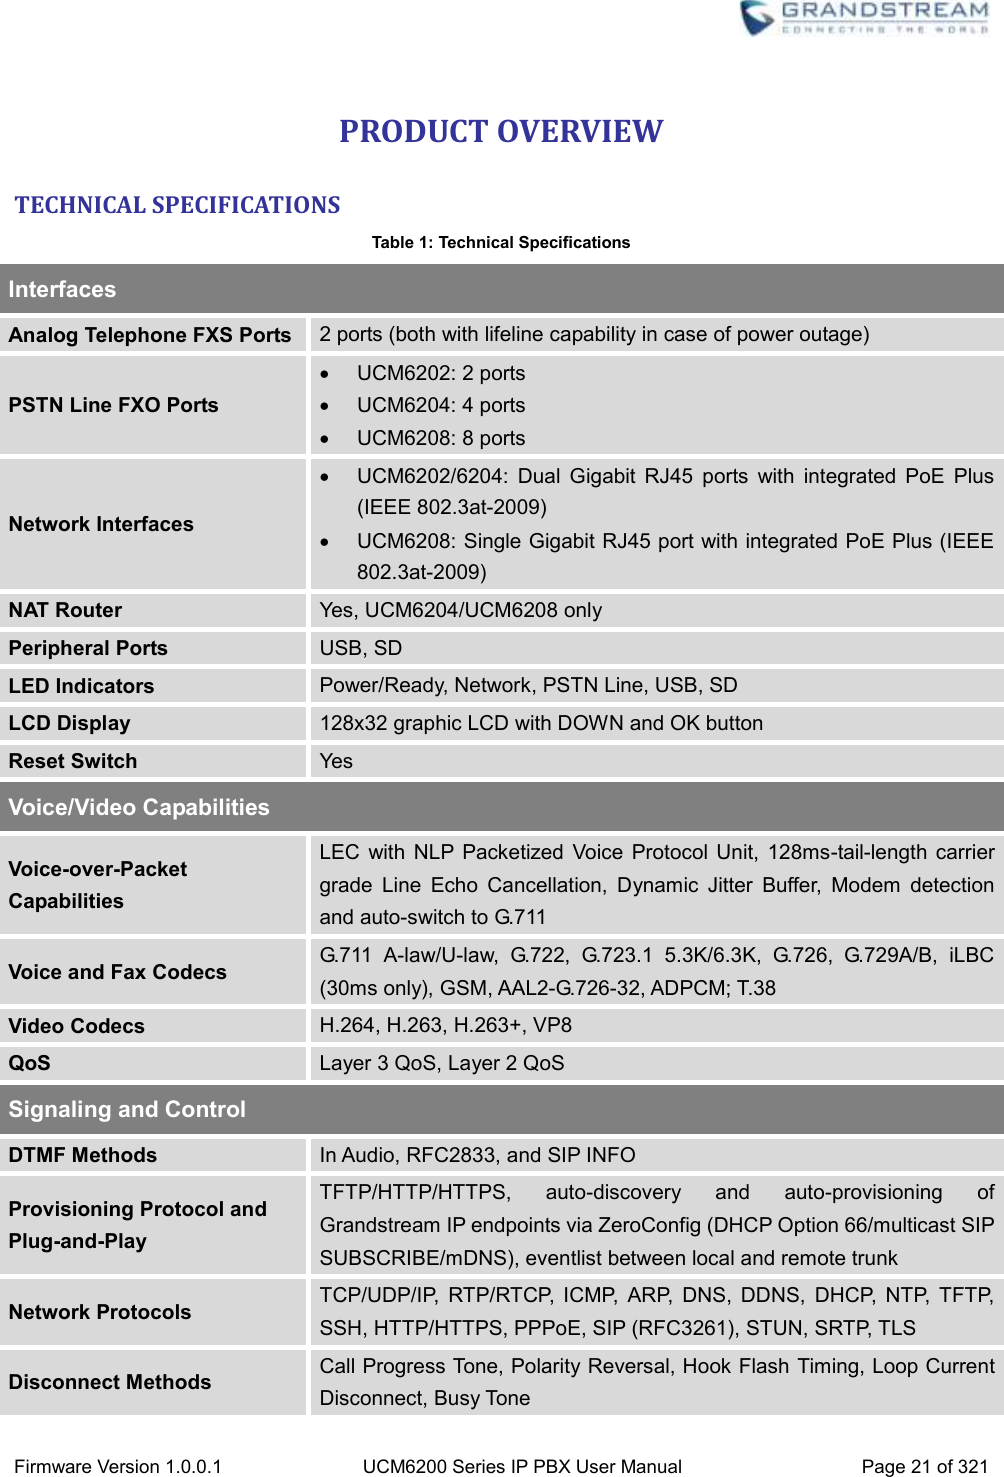  Firmware Version 1.0.0.1 UCM6200 Series IP PBX User Manual Page 21 of 321    PRODUCT OVERVIEW TECHNICAL SPECIFICATIONS Table 1: Technical Specifications Interfaces Analog Telephone FXS Ports 2 ports (both with lifeline capability in case of power outage) PSTN Line FXO Ports   UCM6202: 2 ports   UCM6204: 4 ports   UCM6208: 8 ports Network Interfaces   UCM6202/6204:  Dual  Gigabit  RJ45  ports  with  integrated  PoE  Plus (IEEE 802.3at-2009)   UCM6208: Single Gigabit RJ45 port with integrated PoE Plus (IEEE 802.3at-2009) NAT Router Yes, UCM6204/UCM6208 only Peripheral Ports USB, SD LED Indicators Power/Ready, Network, PSTN Line, USB, SD LCD Display 128x32 graphic LCD with DOWN and OK button Reset Switch Yes Voice/Video Capabilities Voice-over-Packet Capabilities LEC  with NLP  Packetized  Voice  Protocol  Unit, 128ms-tail-length carrier grade  Line  Echo  Cancellation,  Dynamic  Jitter  Buffer,  Modem  detection and auto-switch to G.711 Voice and Fax Codecs G.711  A-law/U-law,  G.722,  G.723.1  5.3K/6.3K,  G.726,  G.729A/B,  iLBC (30ms only), GSM, AAL2-G.726-32, ADPCM; T.38 Video Codecs H.264, H.263, H.263+, VP8 QoS Layer 3 QoS, Layer 2 QoS Signaling and Control DTMF Methods In Audio, RFC2833, and SIP INFO Provisioning Protocol and   Plug-and-Play TFTP/HTTP/HTTPS,  auto-discovery  and  auto-provisioning  of   Grandstream IP endpoints via ZeroConfig (DHCP Option 66/multicast SIP SUBSCRIBE/mDNS), eventlist between local and remote trunk Network Protocols TCP/UDP/IP,  RTP/RTCP,  ICMP,  ARP,  DNS,  DDNS,  DHCP,  NTP,  TFTP, SSH, HTTP/HTTPS, PPPoE, SIP (RFC3261), STUN, SRTP, TLS Disconnect Methods Call Progress Tone, Polarity Reversal, Hook Flash Timing, Loop Current Disconnect, Busy Tone 